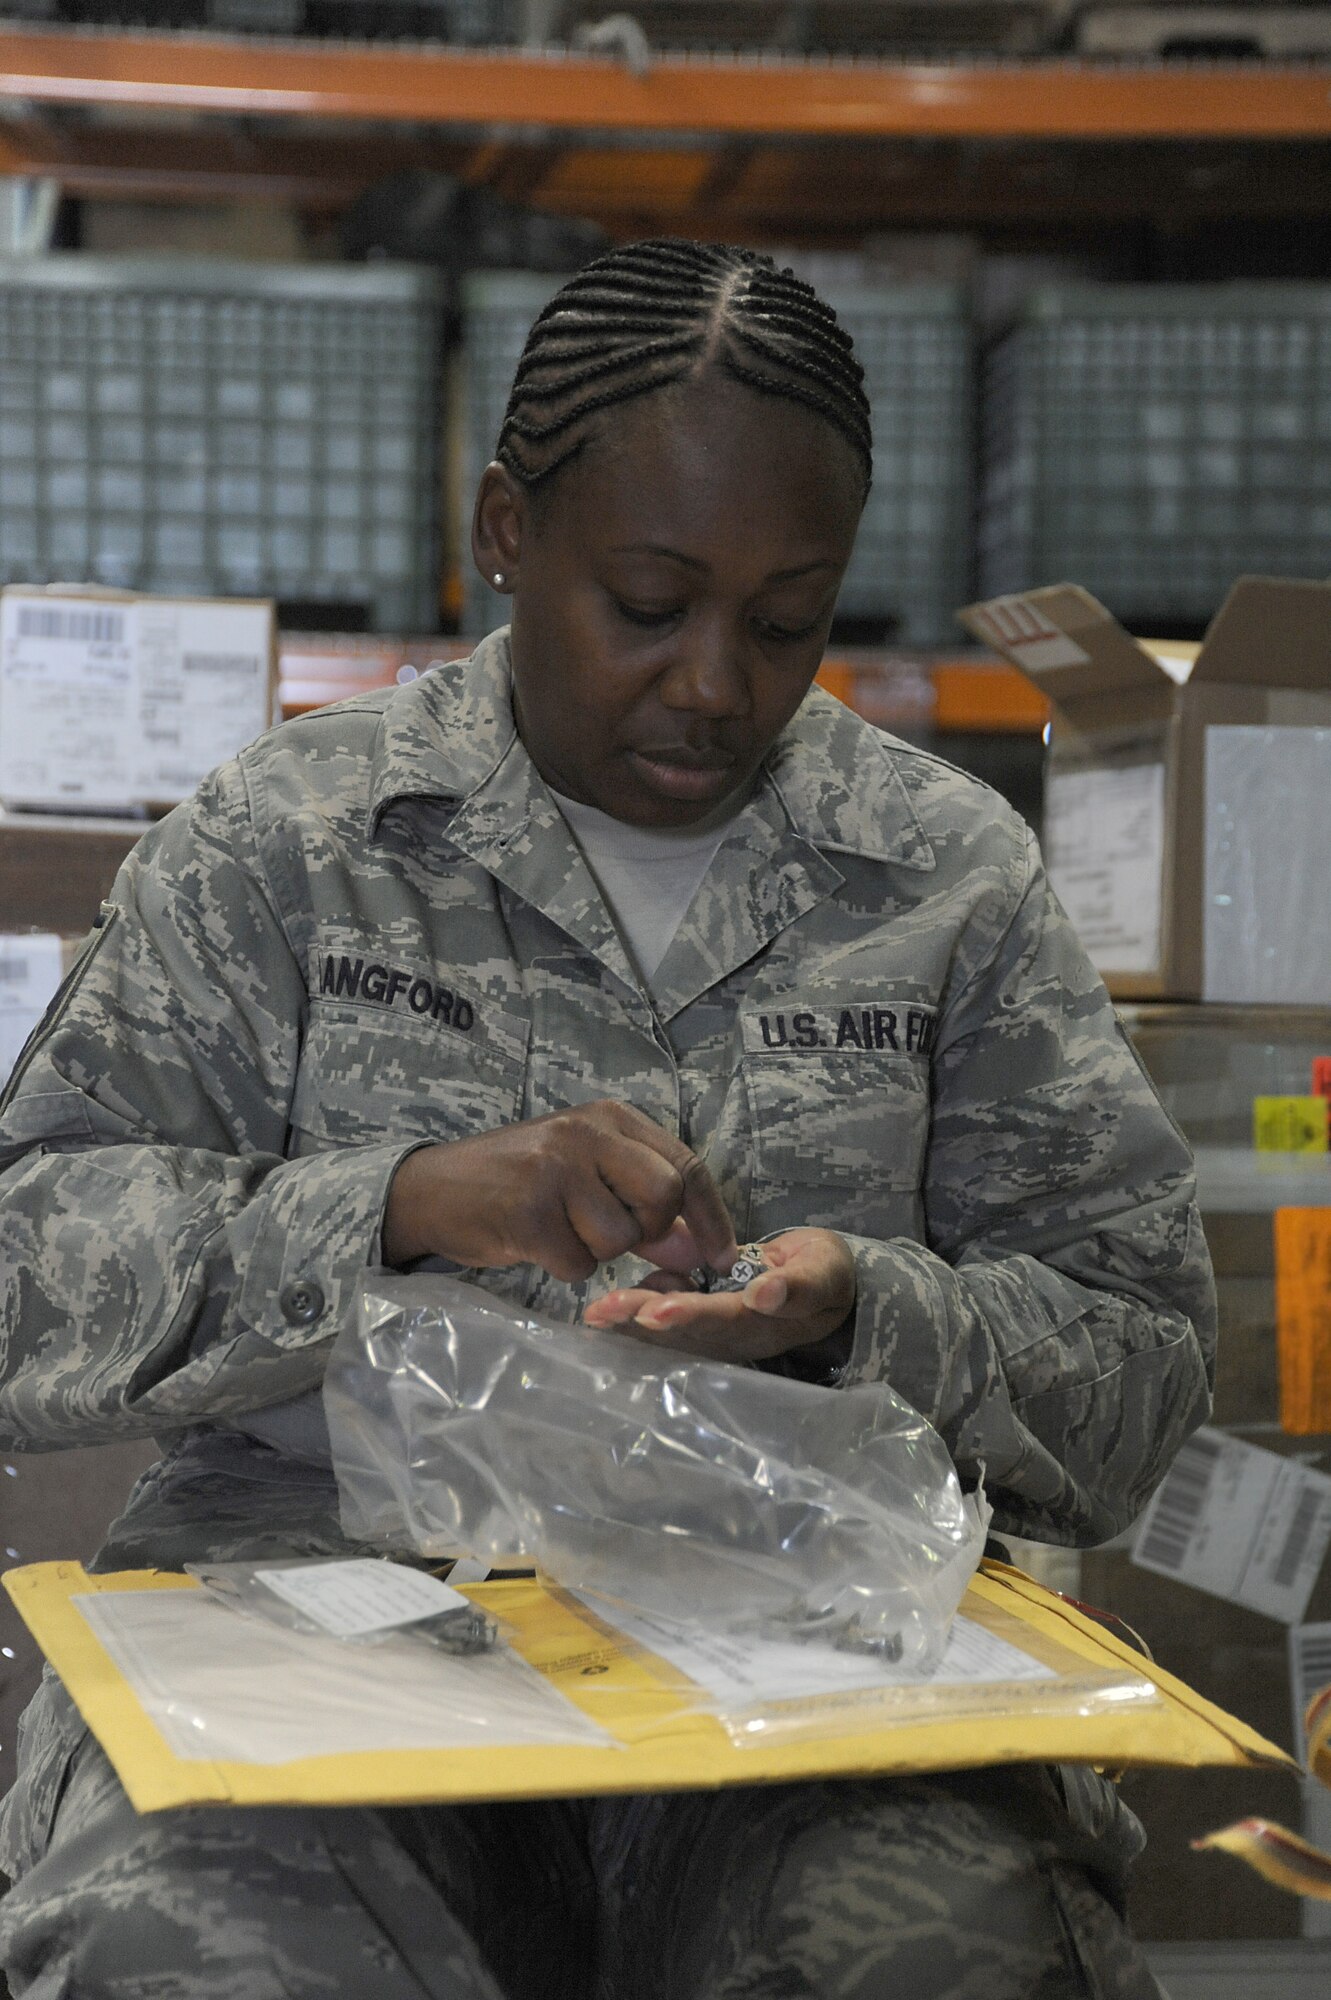 Master Sgt. Dorothy Langford, 380th Logistics Readiness Squadron, counts nuts and bolts from a package at the receiving dock, April 24 at an undisclosed location in Southwest Asia. The receiving section counts each item and matches it against the packing slip to ensure all items have arrived. Sergeant Langford is deployed from Spagdahlem AB, Germany and hails from Columbus, Miss. (U.S. Air Force photo by Senior Airman Brian J. Ellis) (Released)